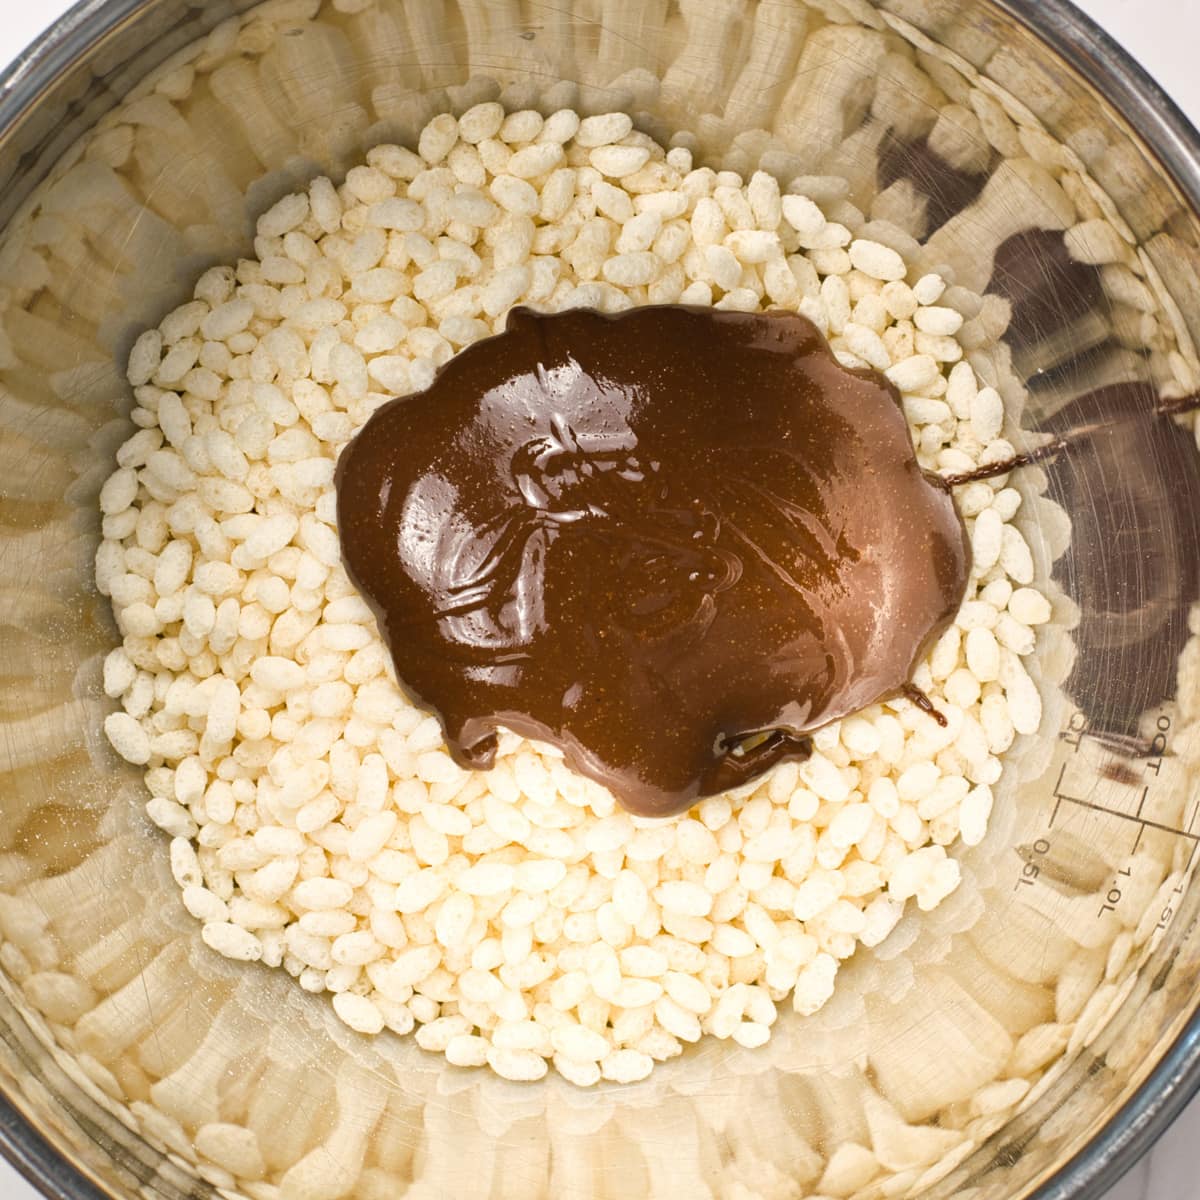 Crisp rice ceral and chocolate mixture in a mixing bowl.